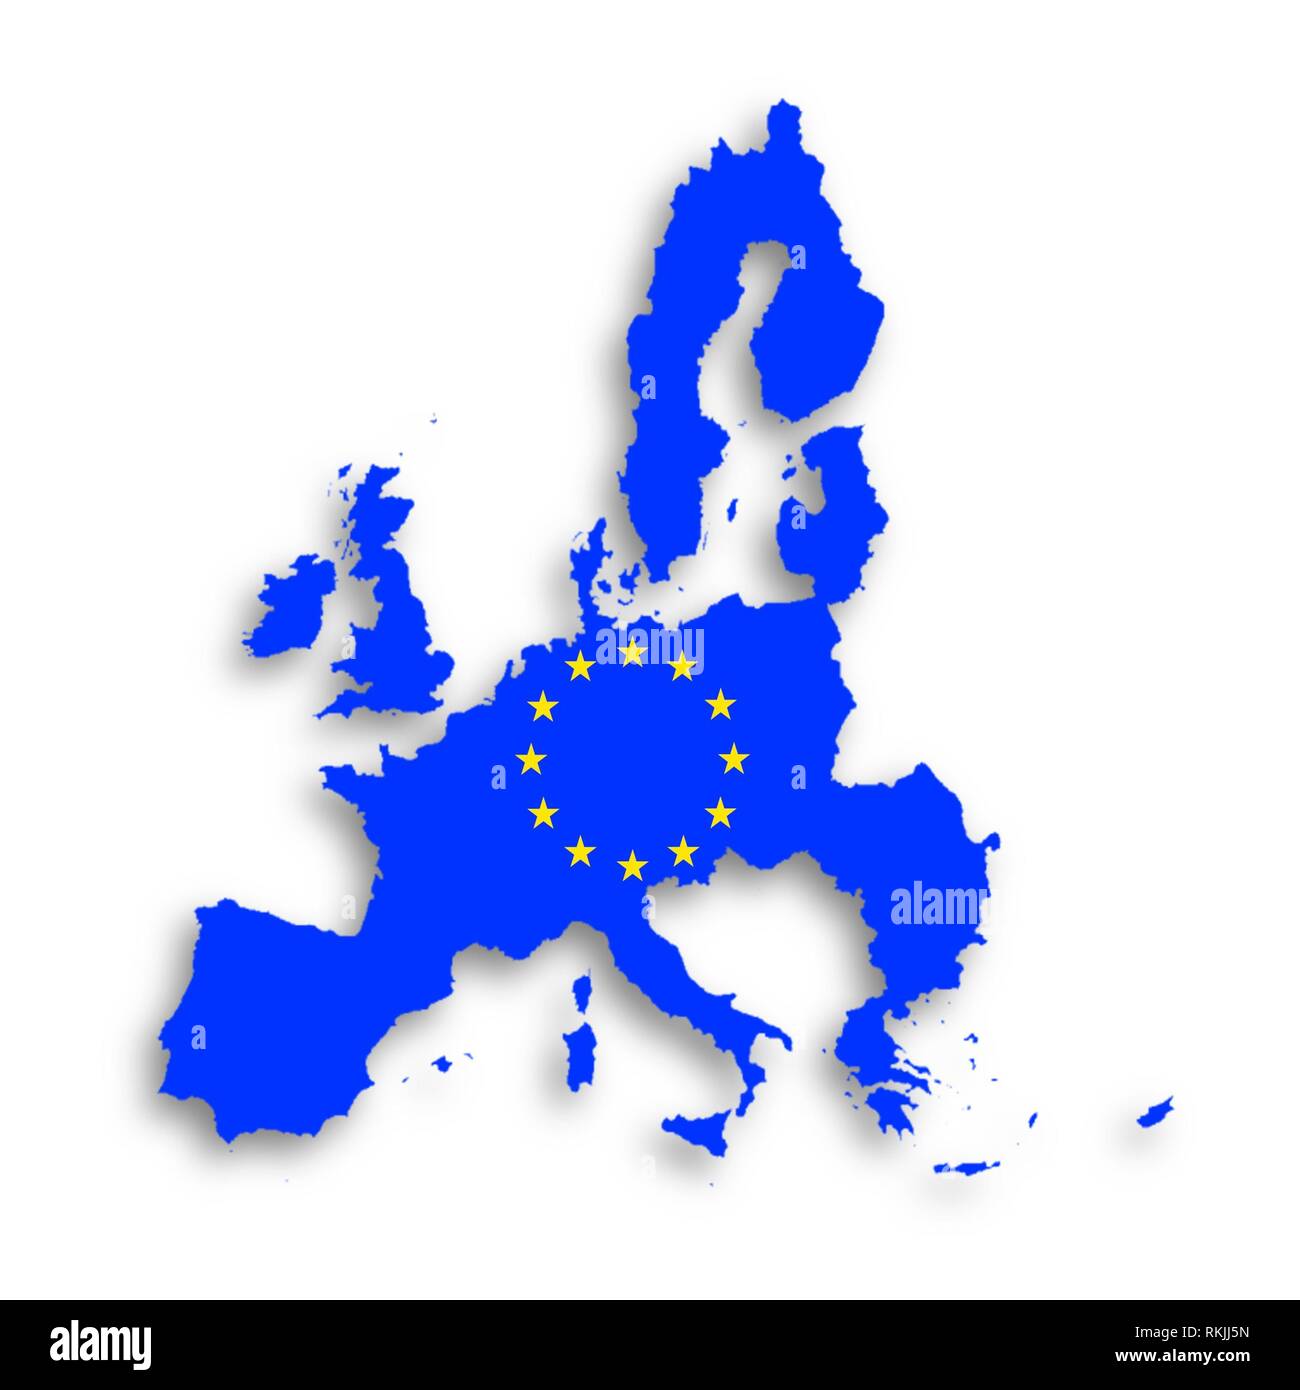 Illustration of a map of European union and EU flag, isolated